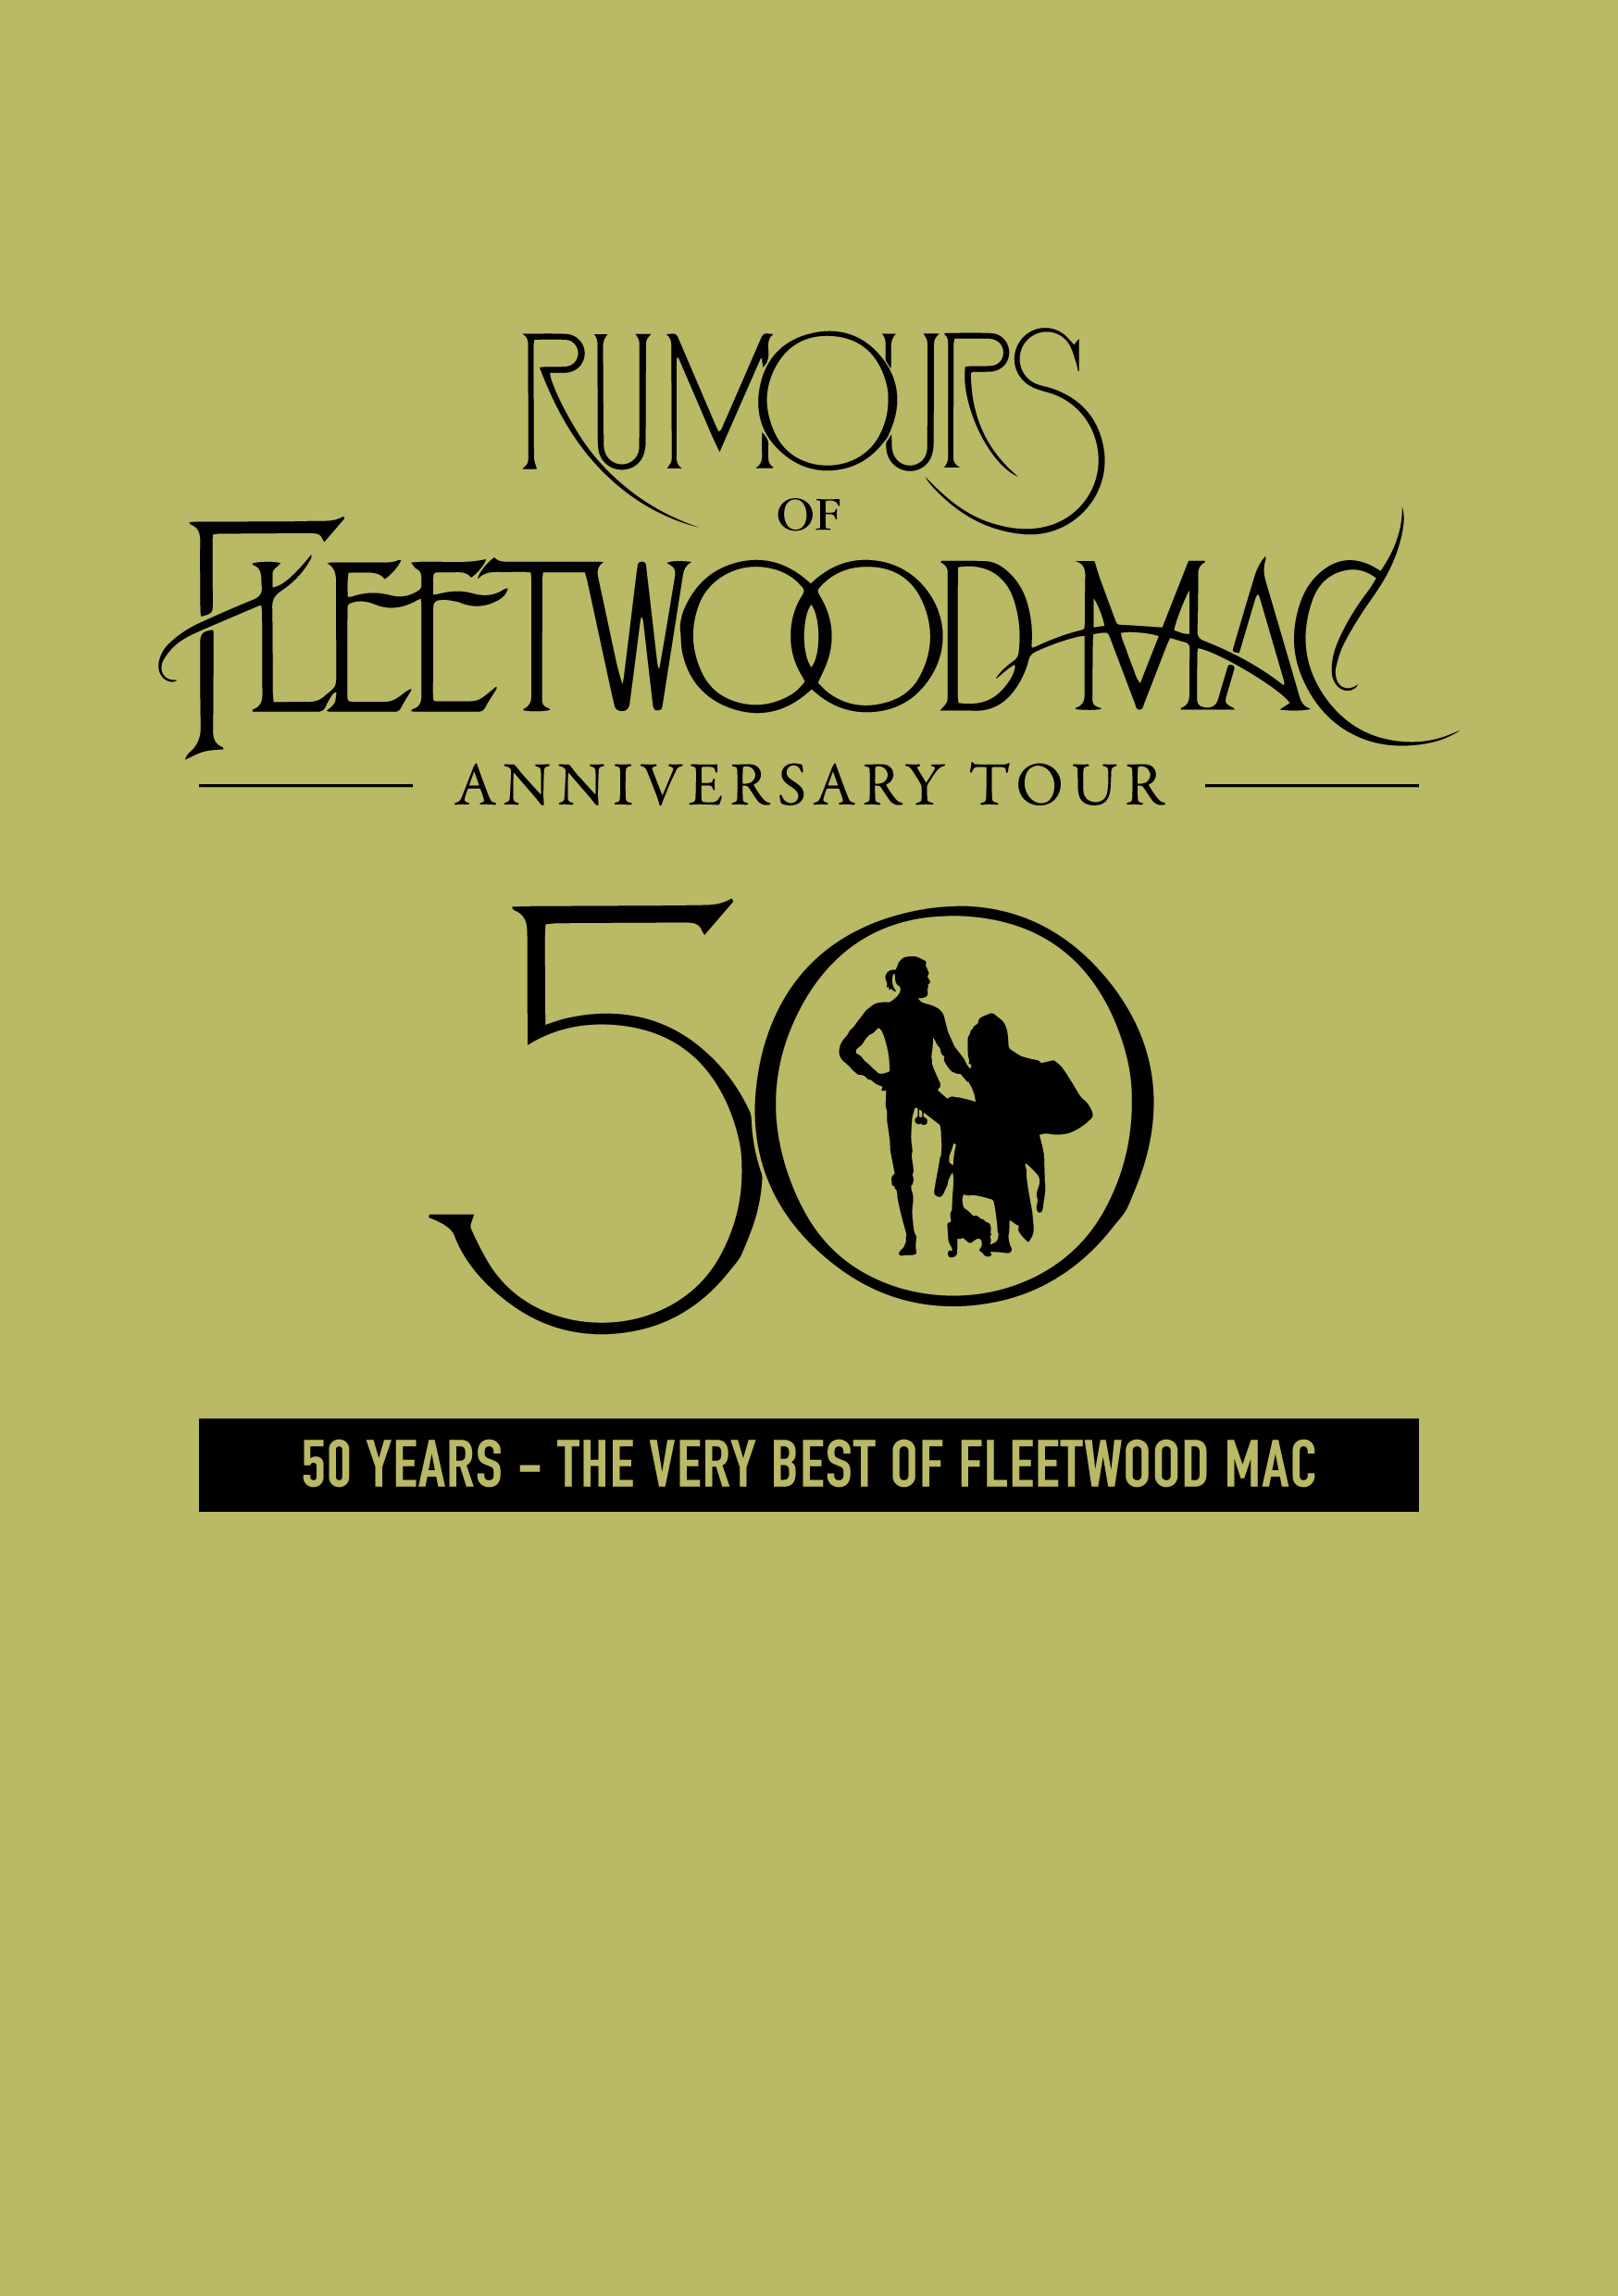 rumours of fleetwood mac tour review